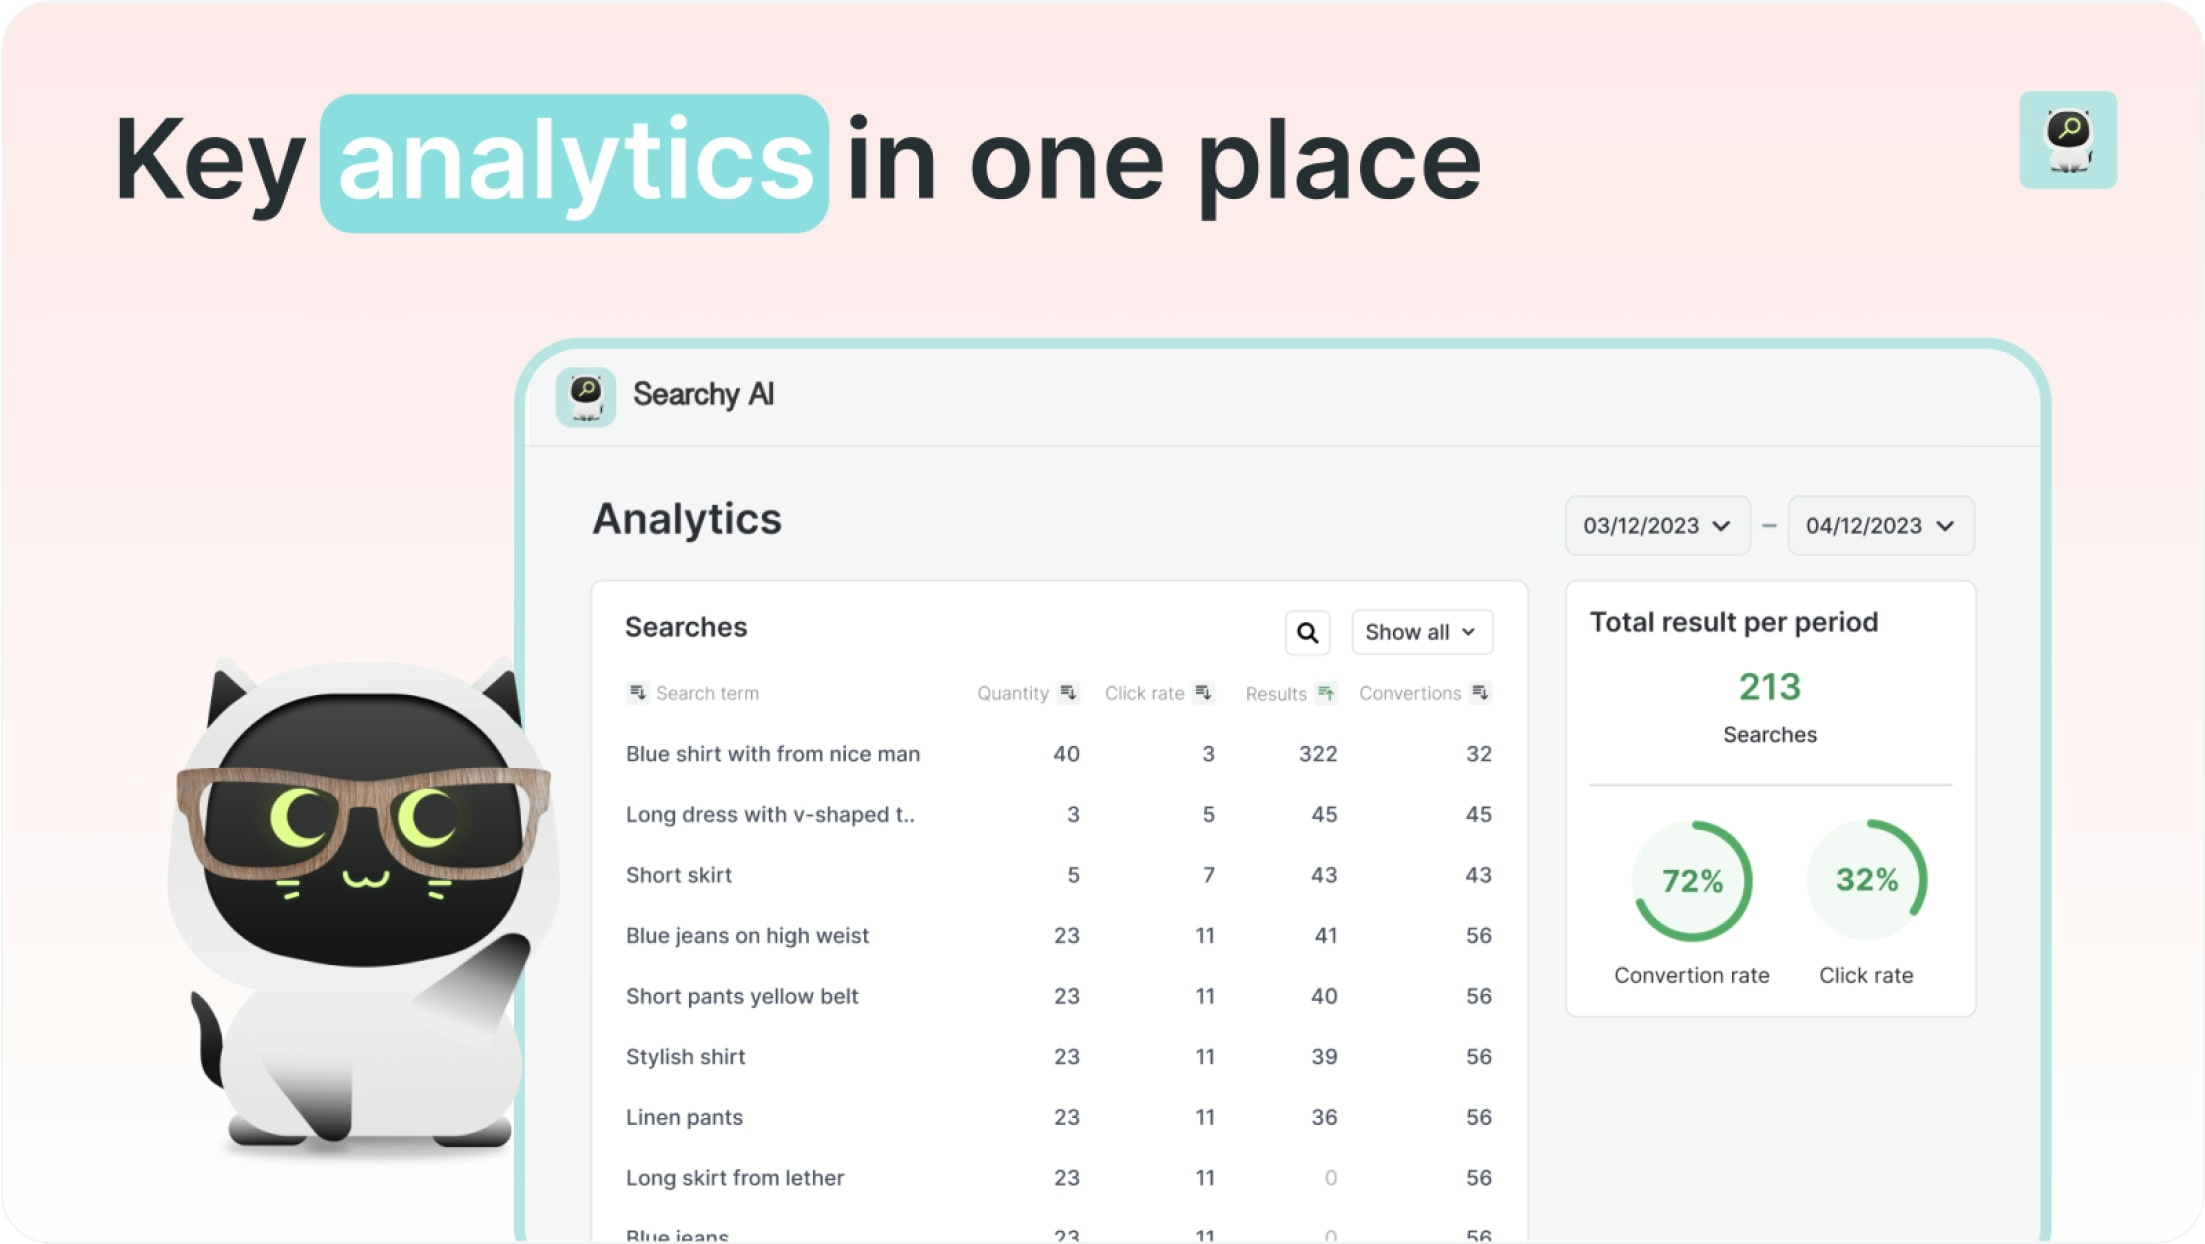 Key analytics in one place